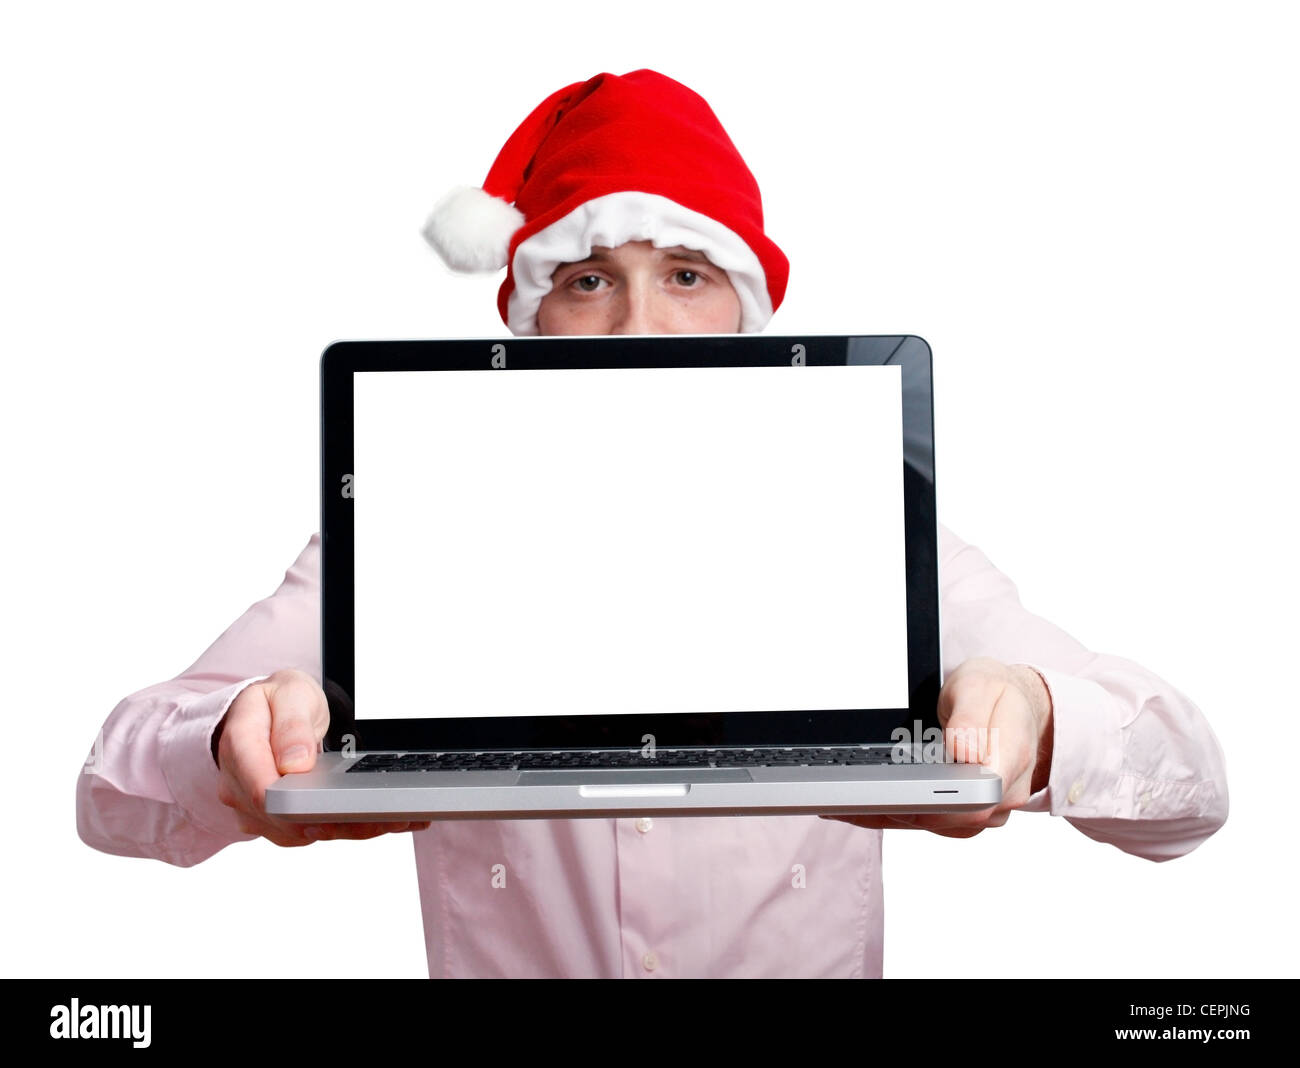 Businessman with santa hat and computer Stock Photo